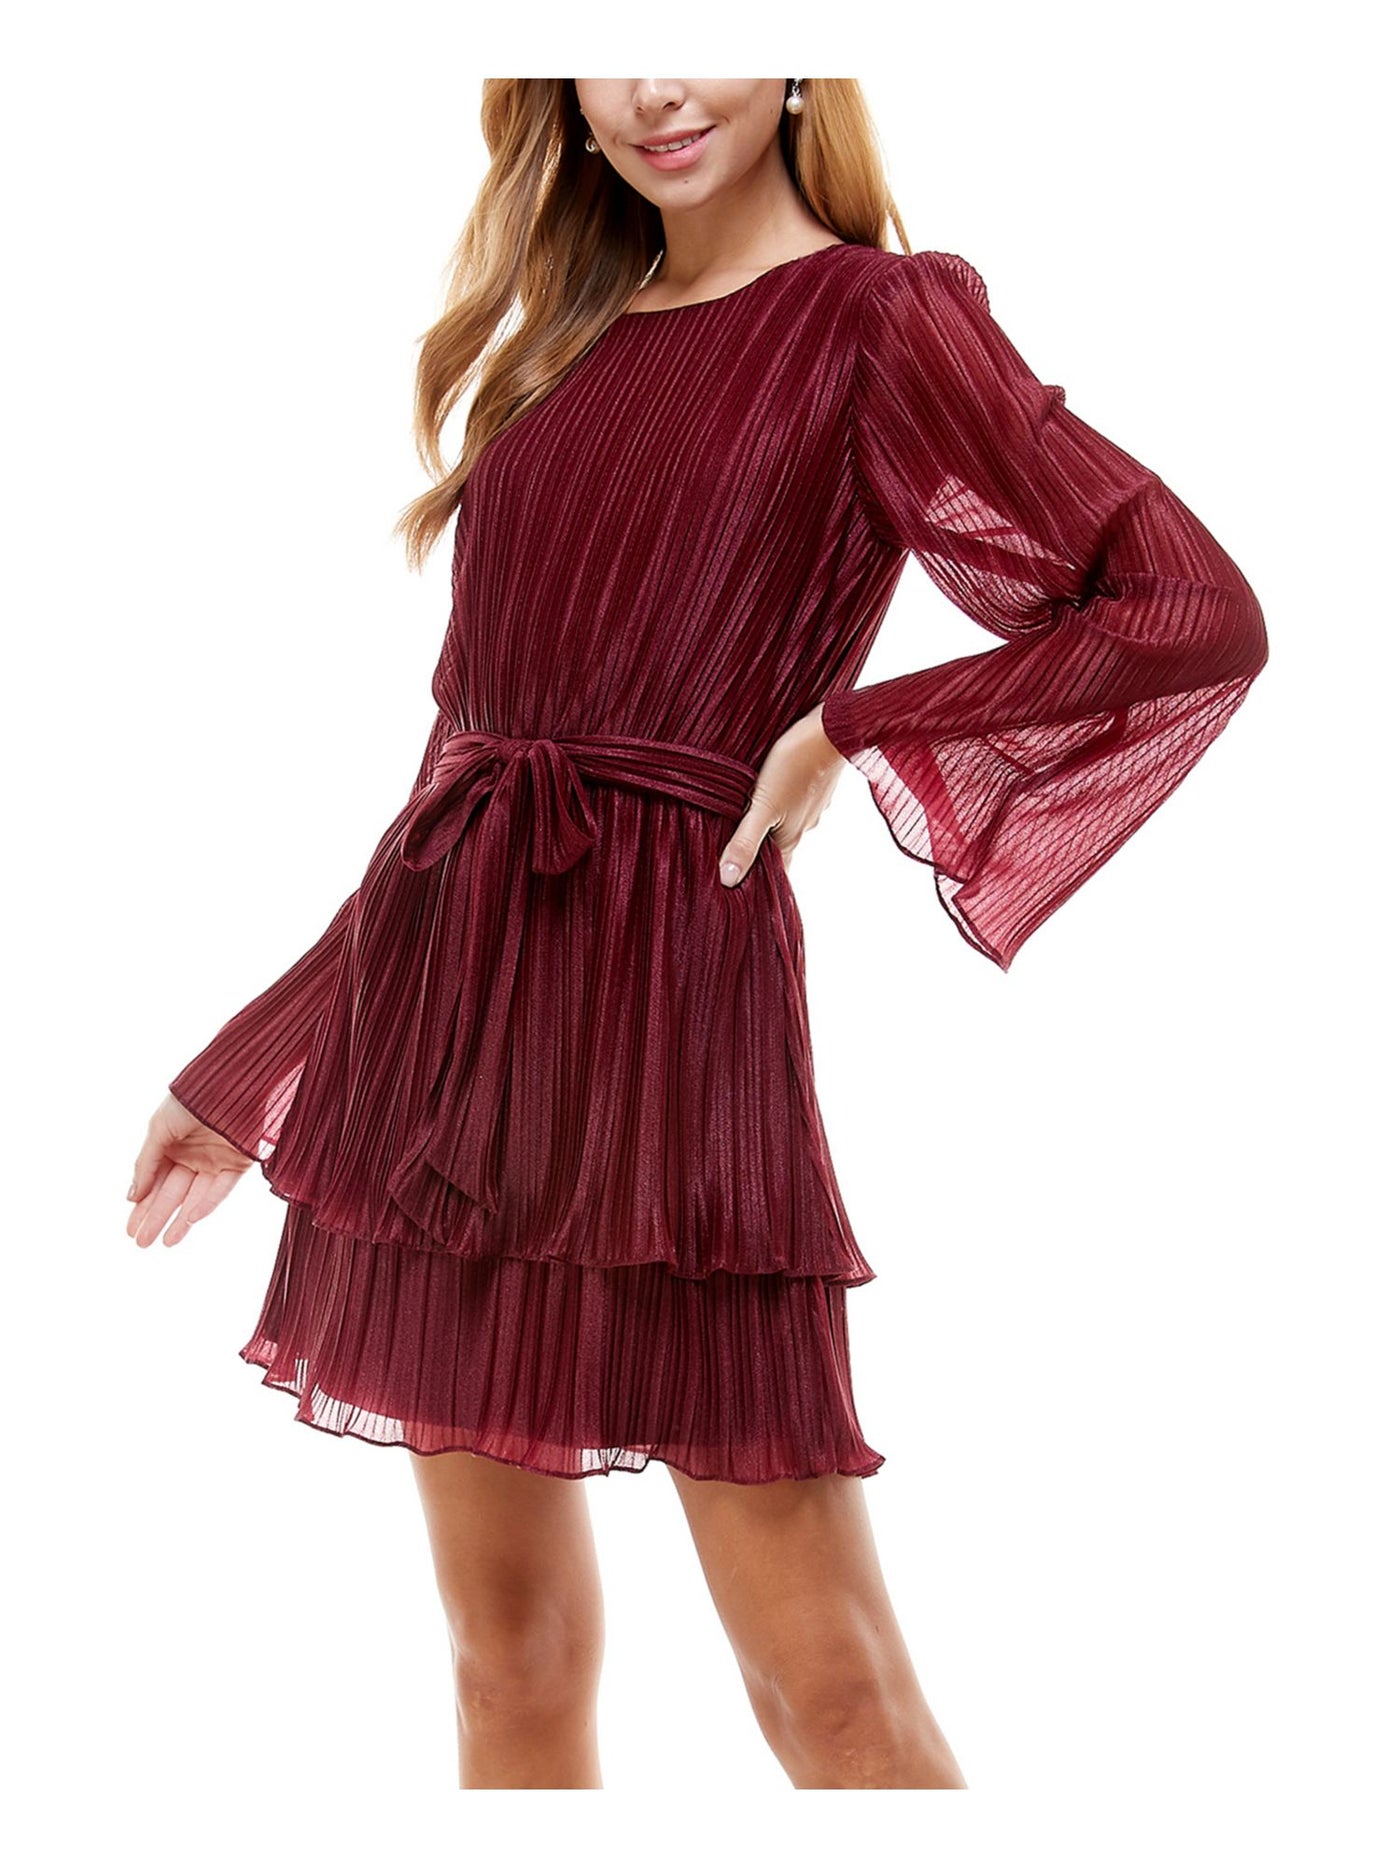 CITY STUDIO Womens Burgundy Belted Pleated Bell Sleeve Jewel Neck Short Party Fit + Flare Dress Juniors M